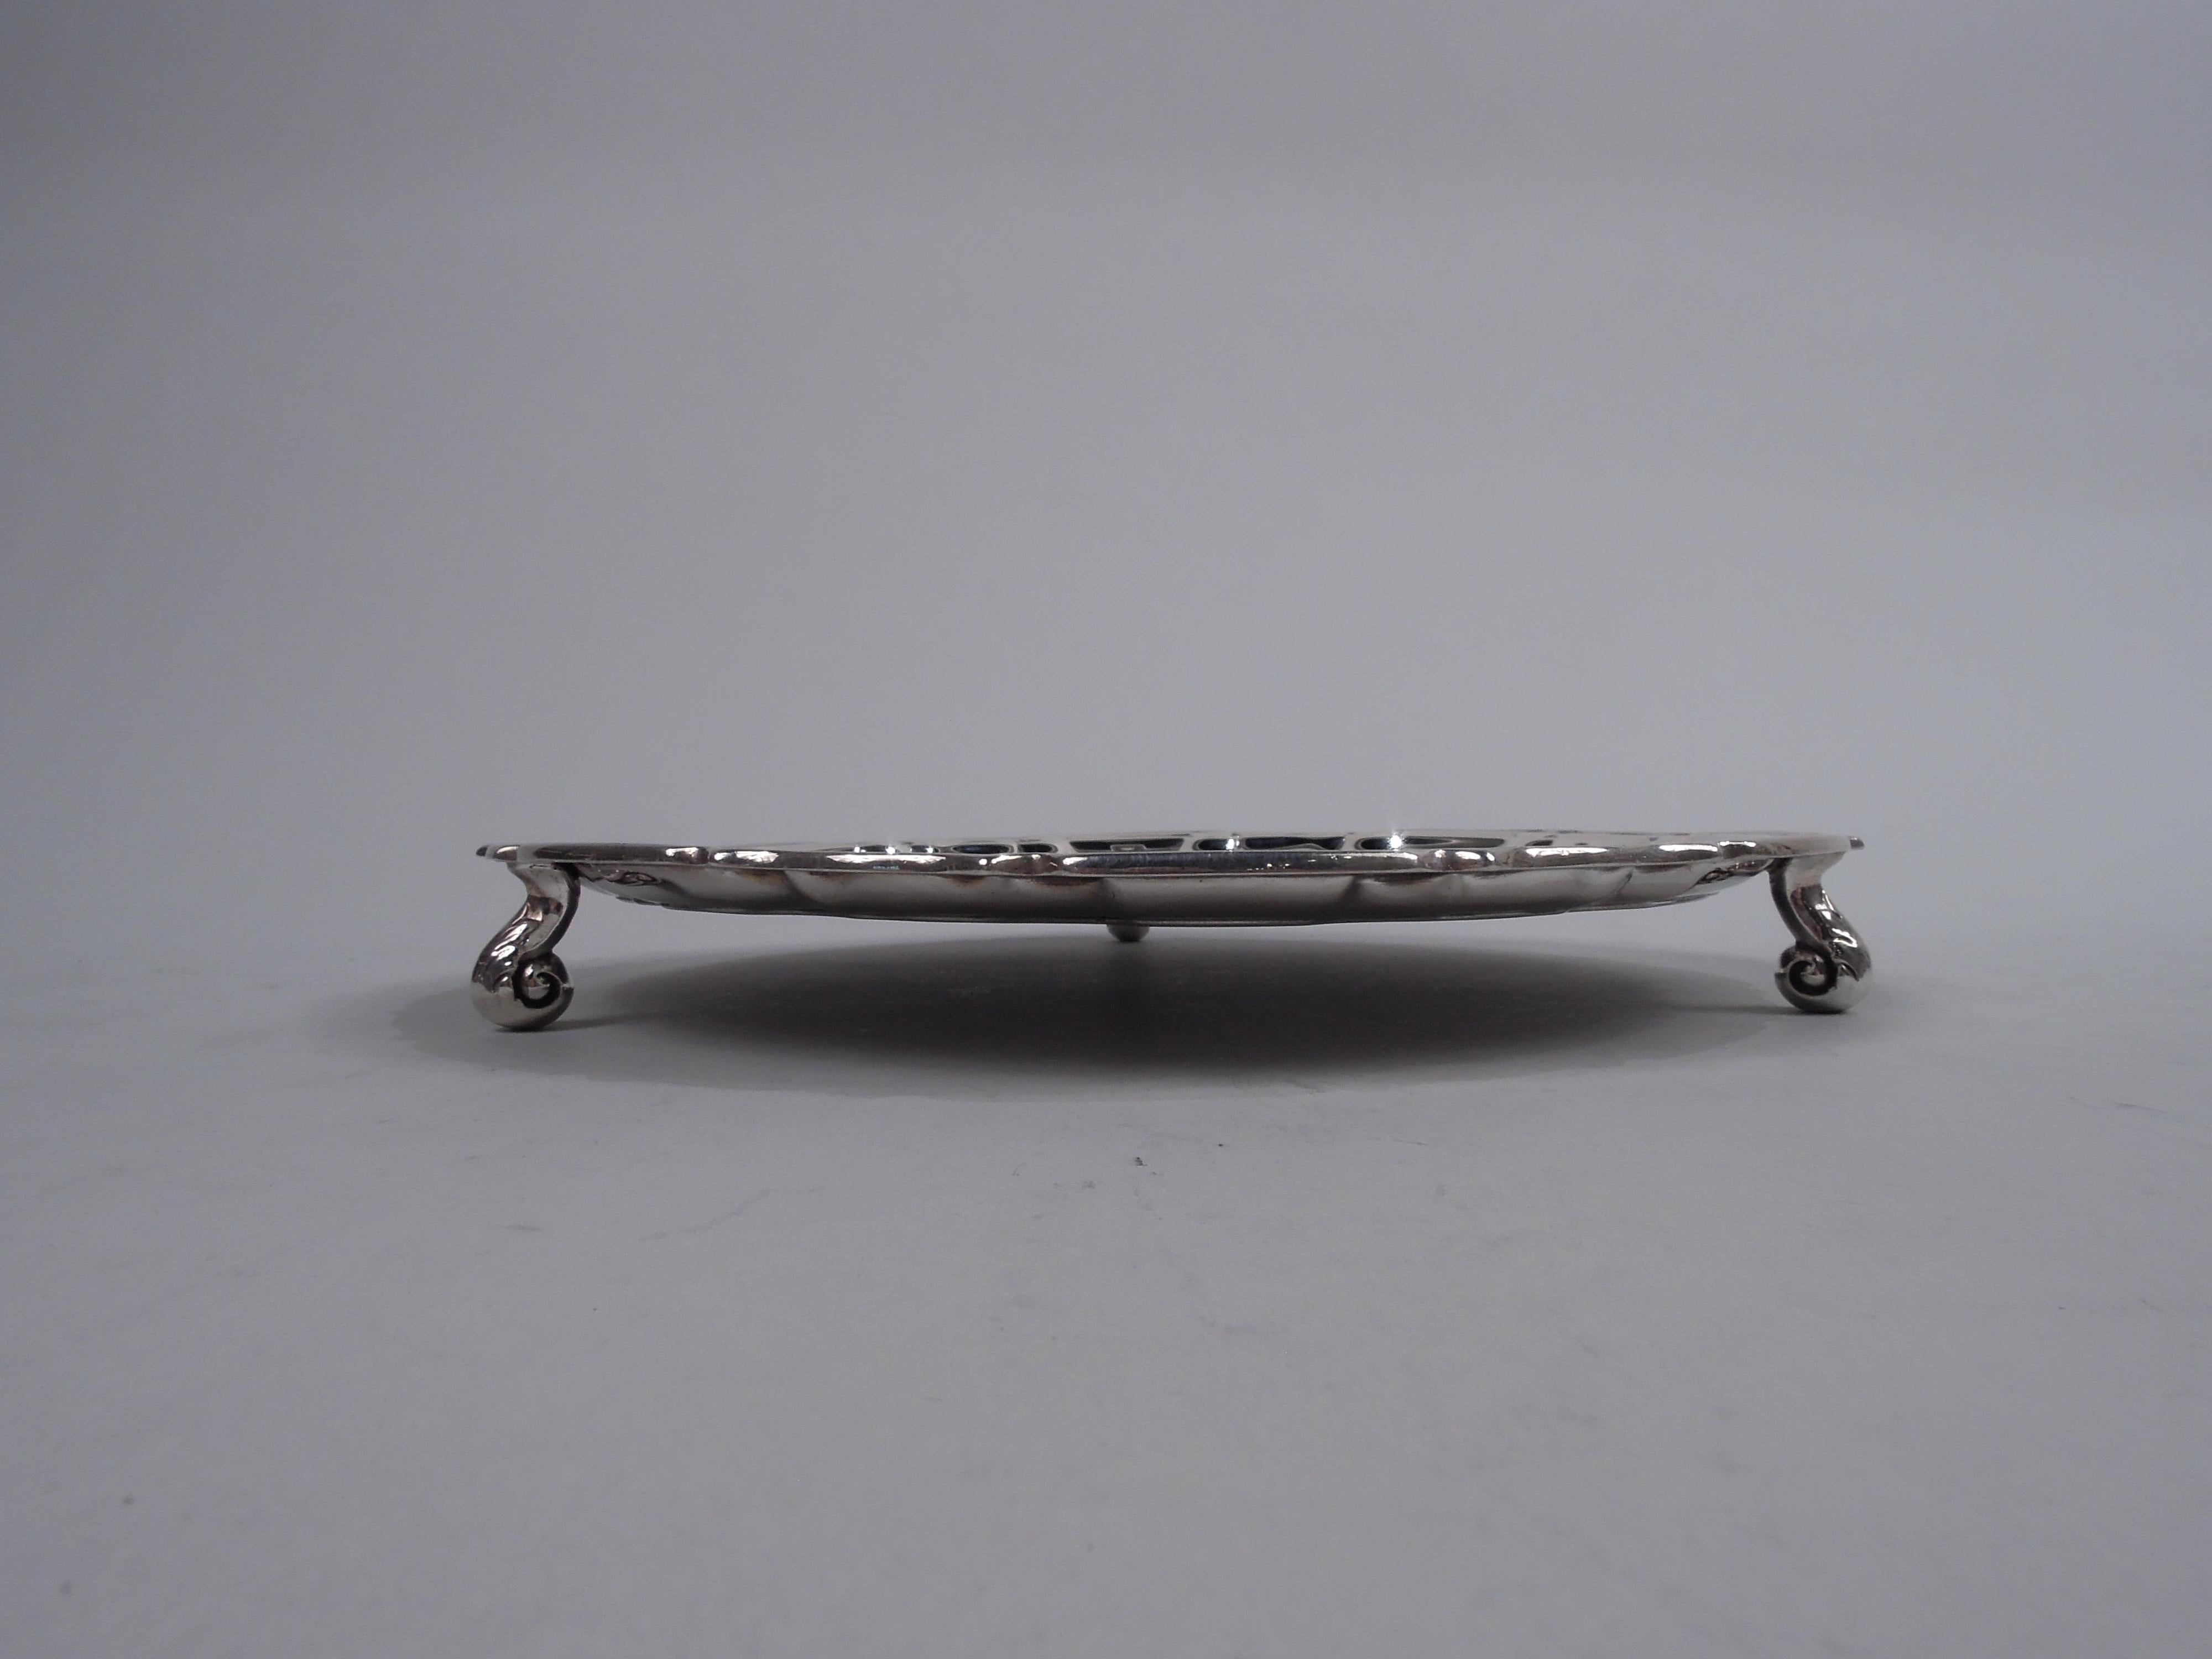 Edwardian Georgian sterling silver salver. Made by William Hutton & Sons Ltd in Sheffield in 1911. Flat and molded piecrust rim; three leaf-capped volute scroll supports. Fully marked. Weight: 9.4 troy ounces. 